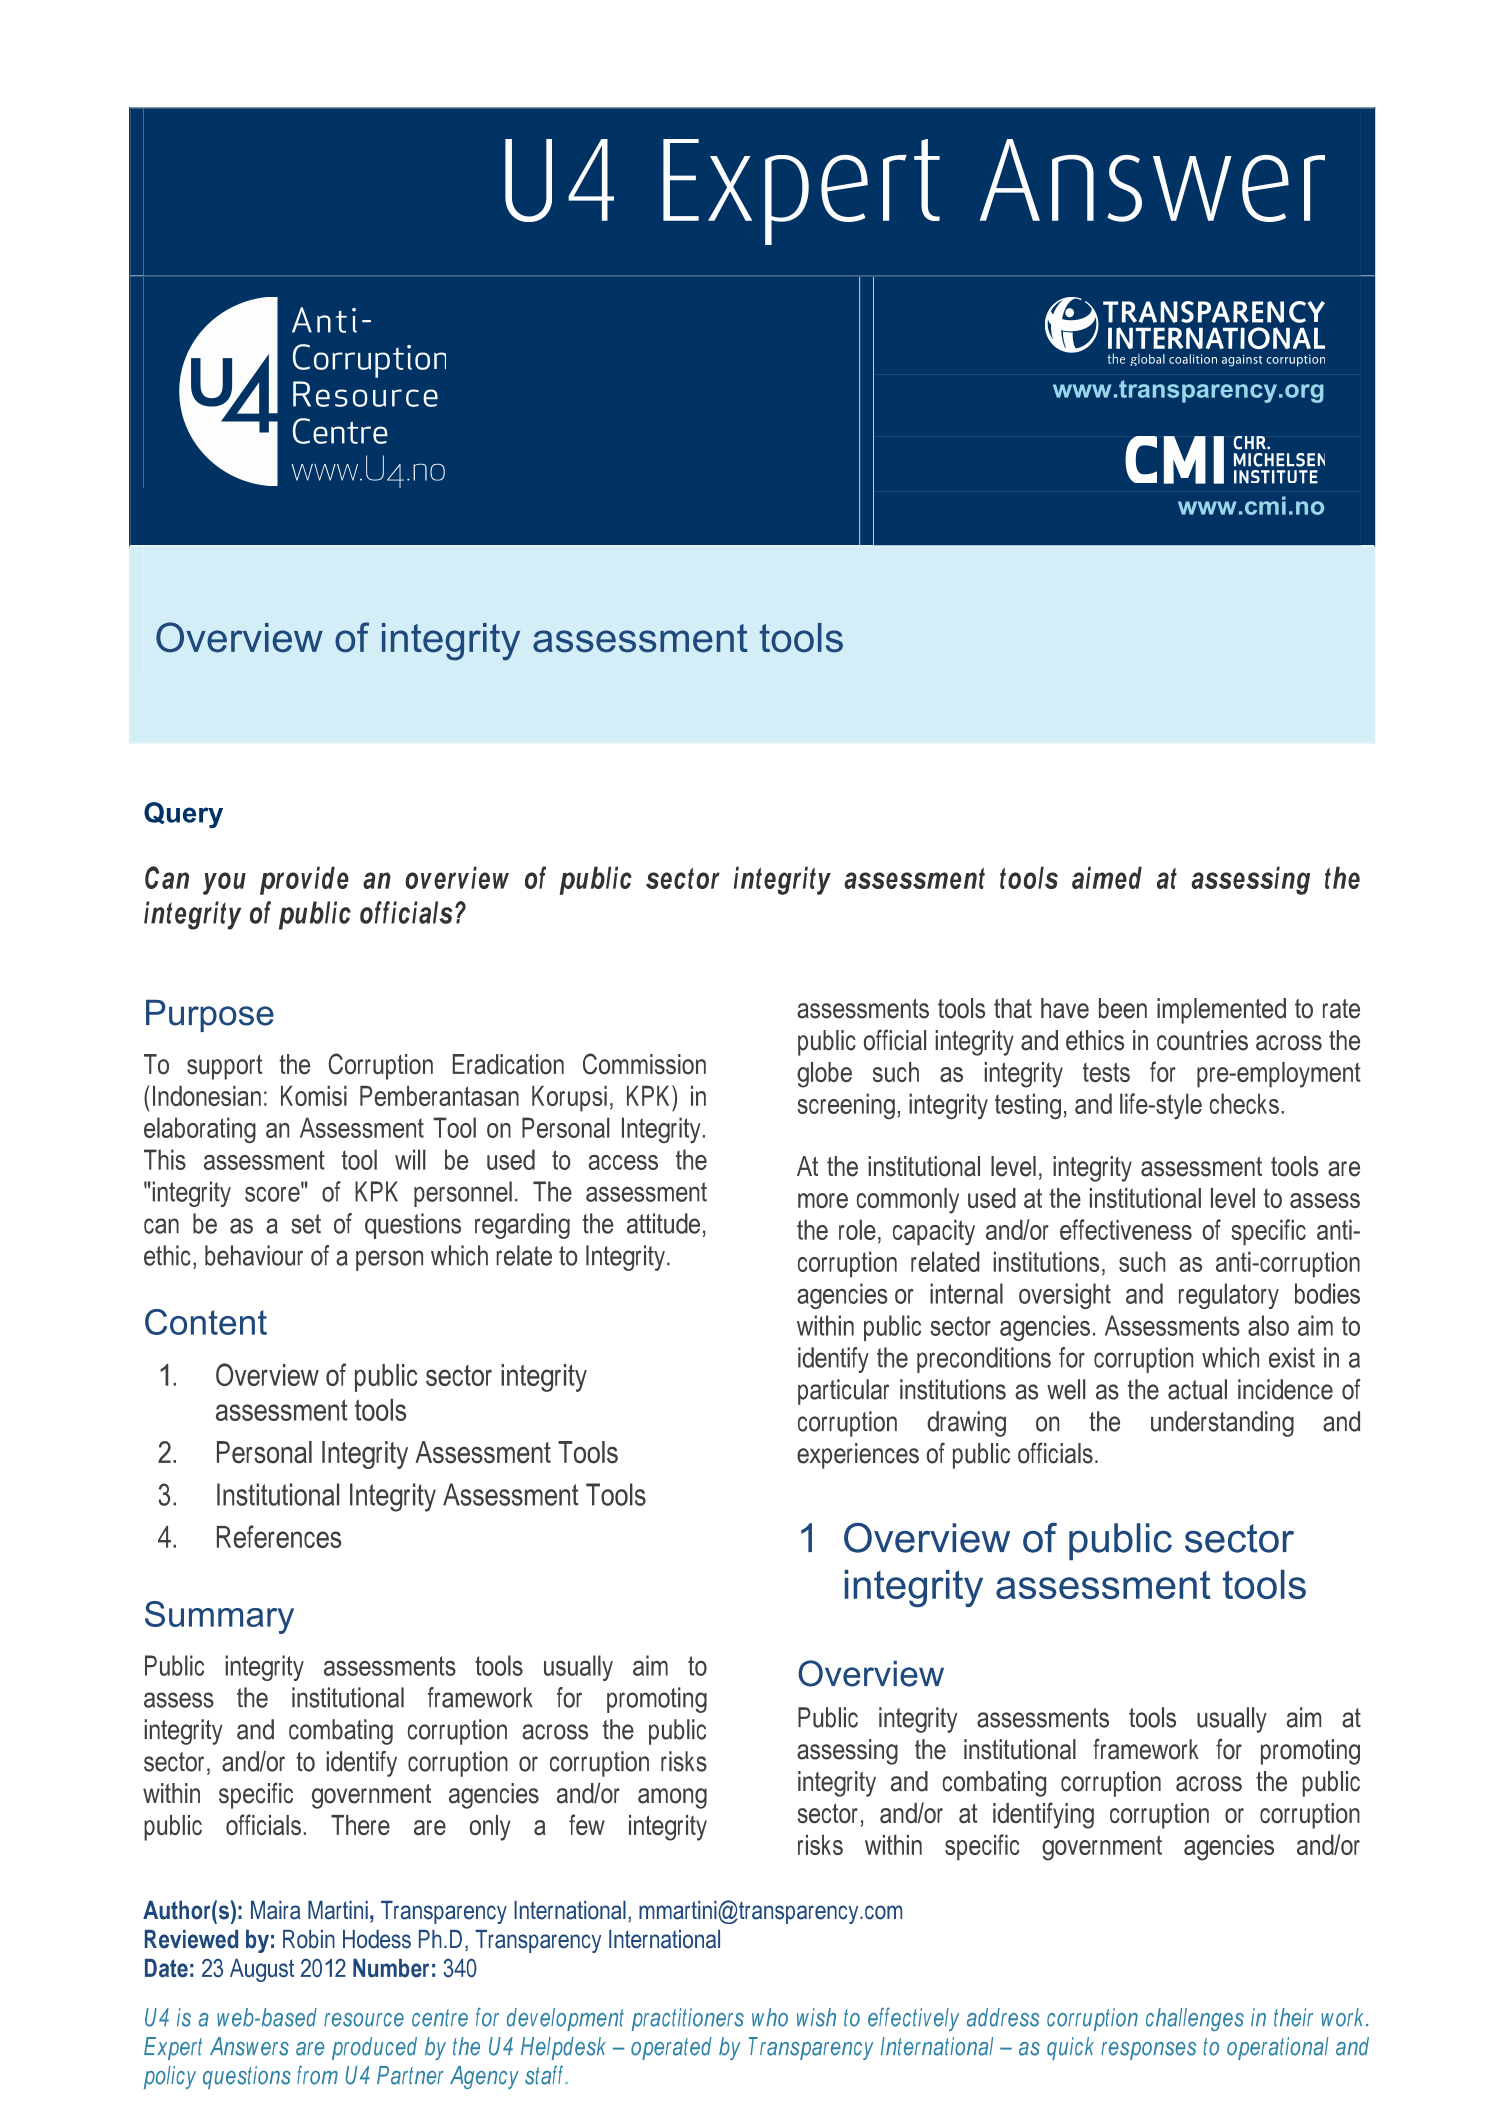 Overview of integrity assessment tools